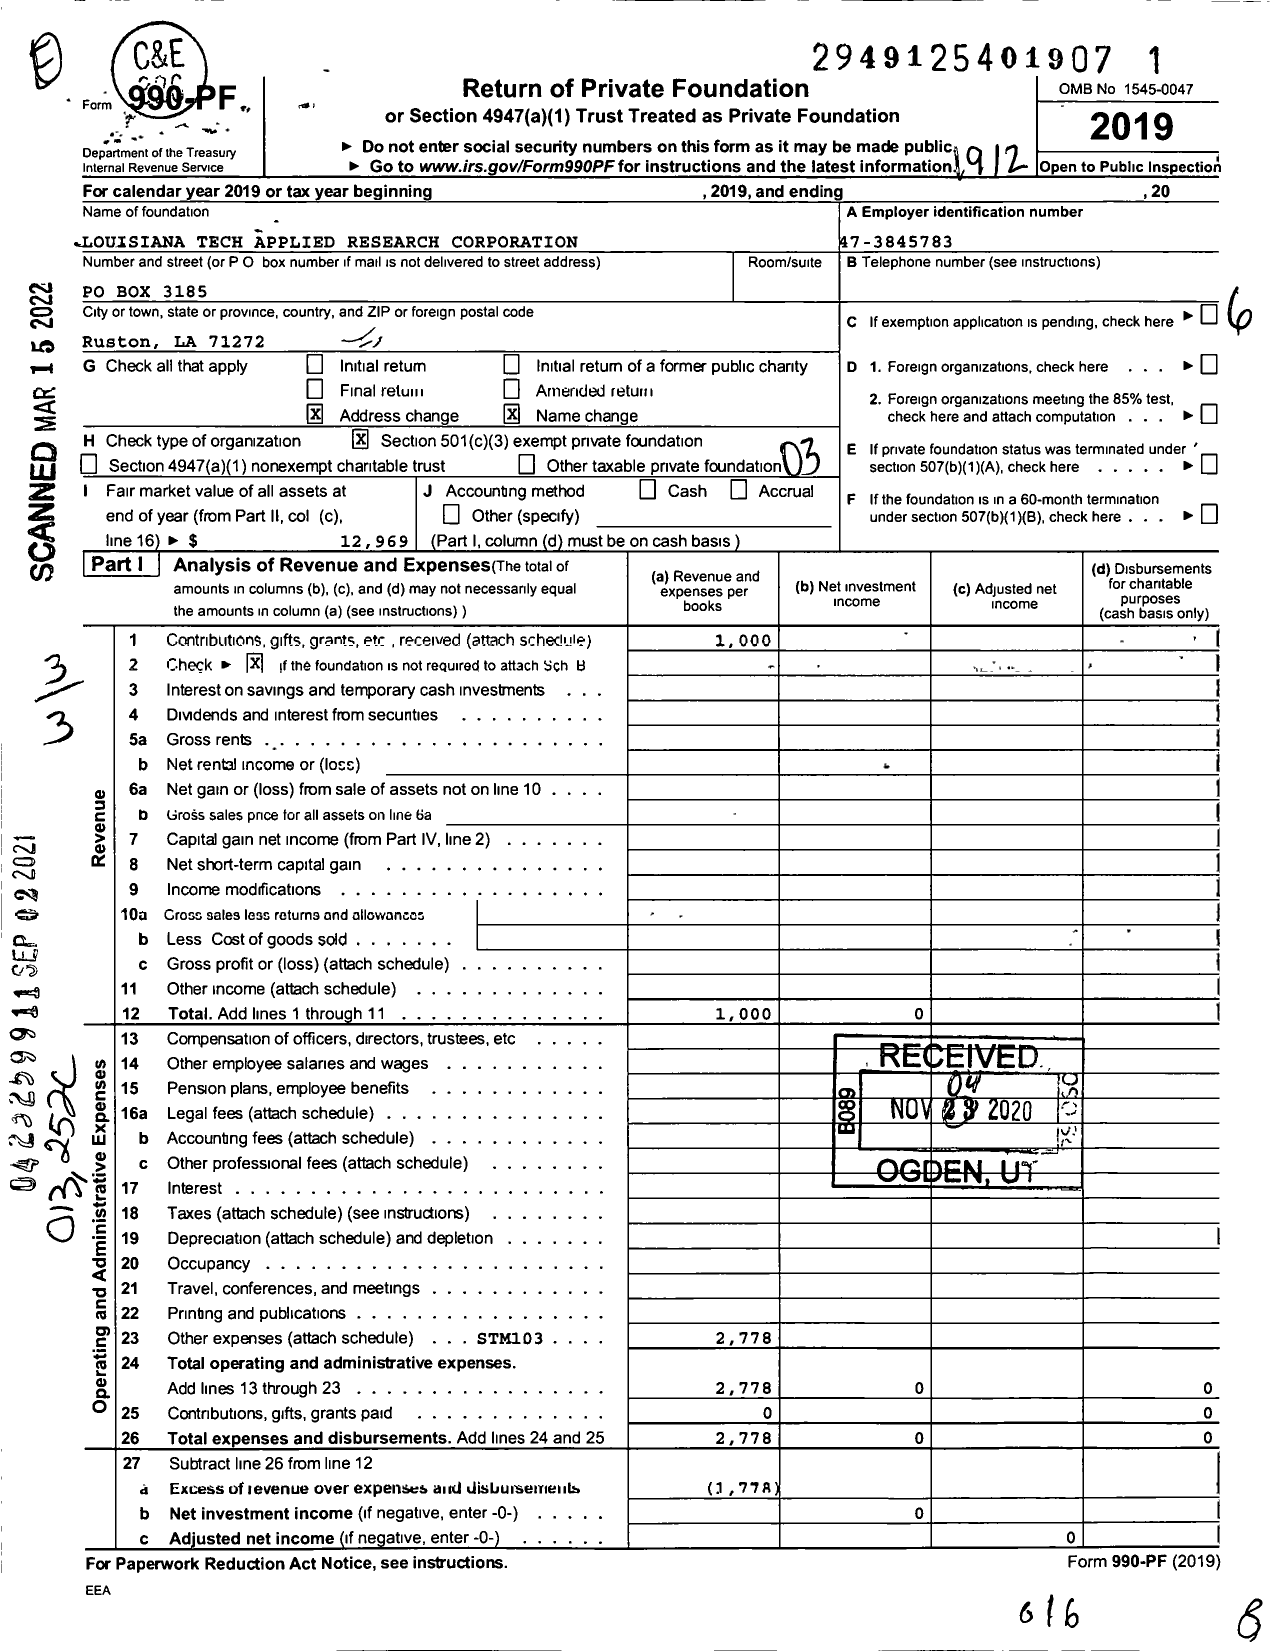 Image of first page of 2019 Form 990PF for Louisiana Tech Applied Research Corporation